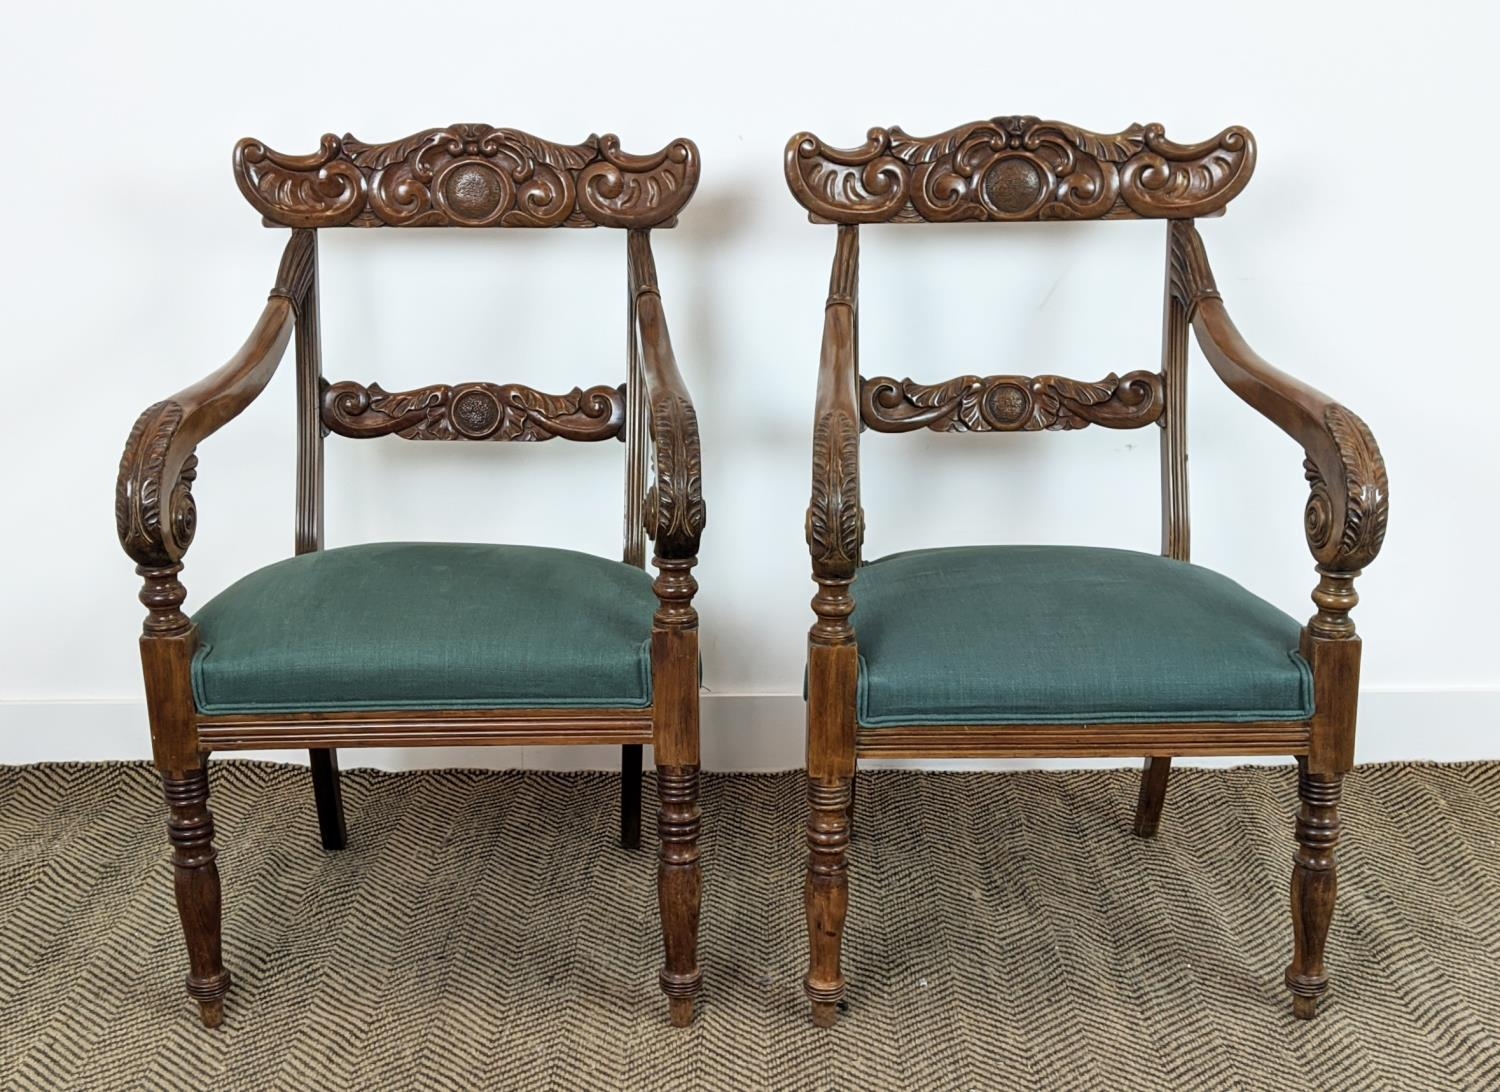 ARMCHAIRS, a pair, mid 19th century mahogany with green stuffover seats, 91cm H x 58cm x 58cm. (2) - Image 2 of 18